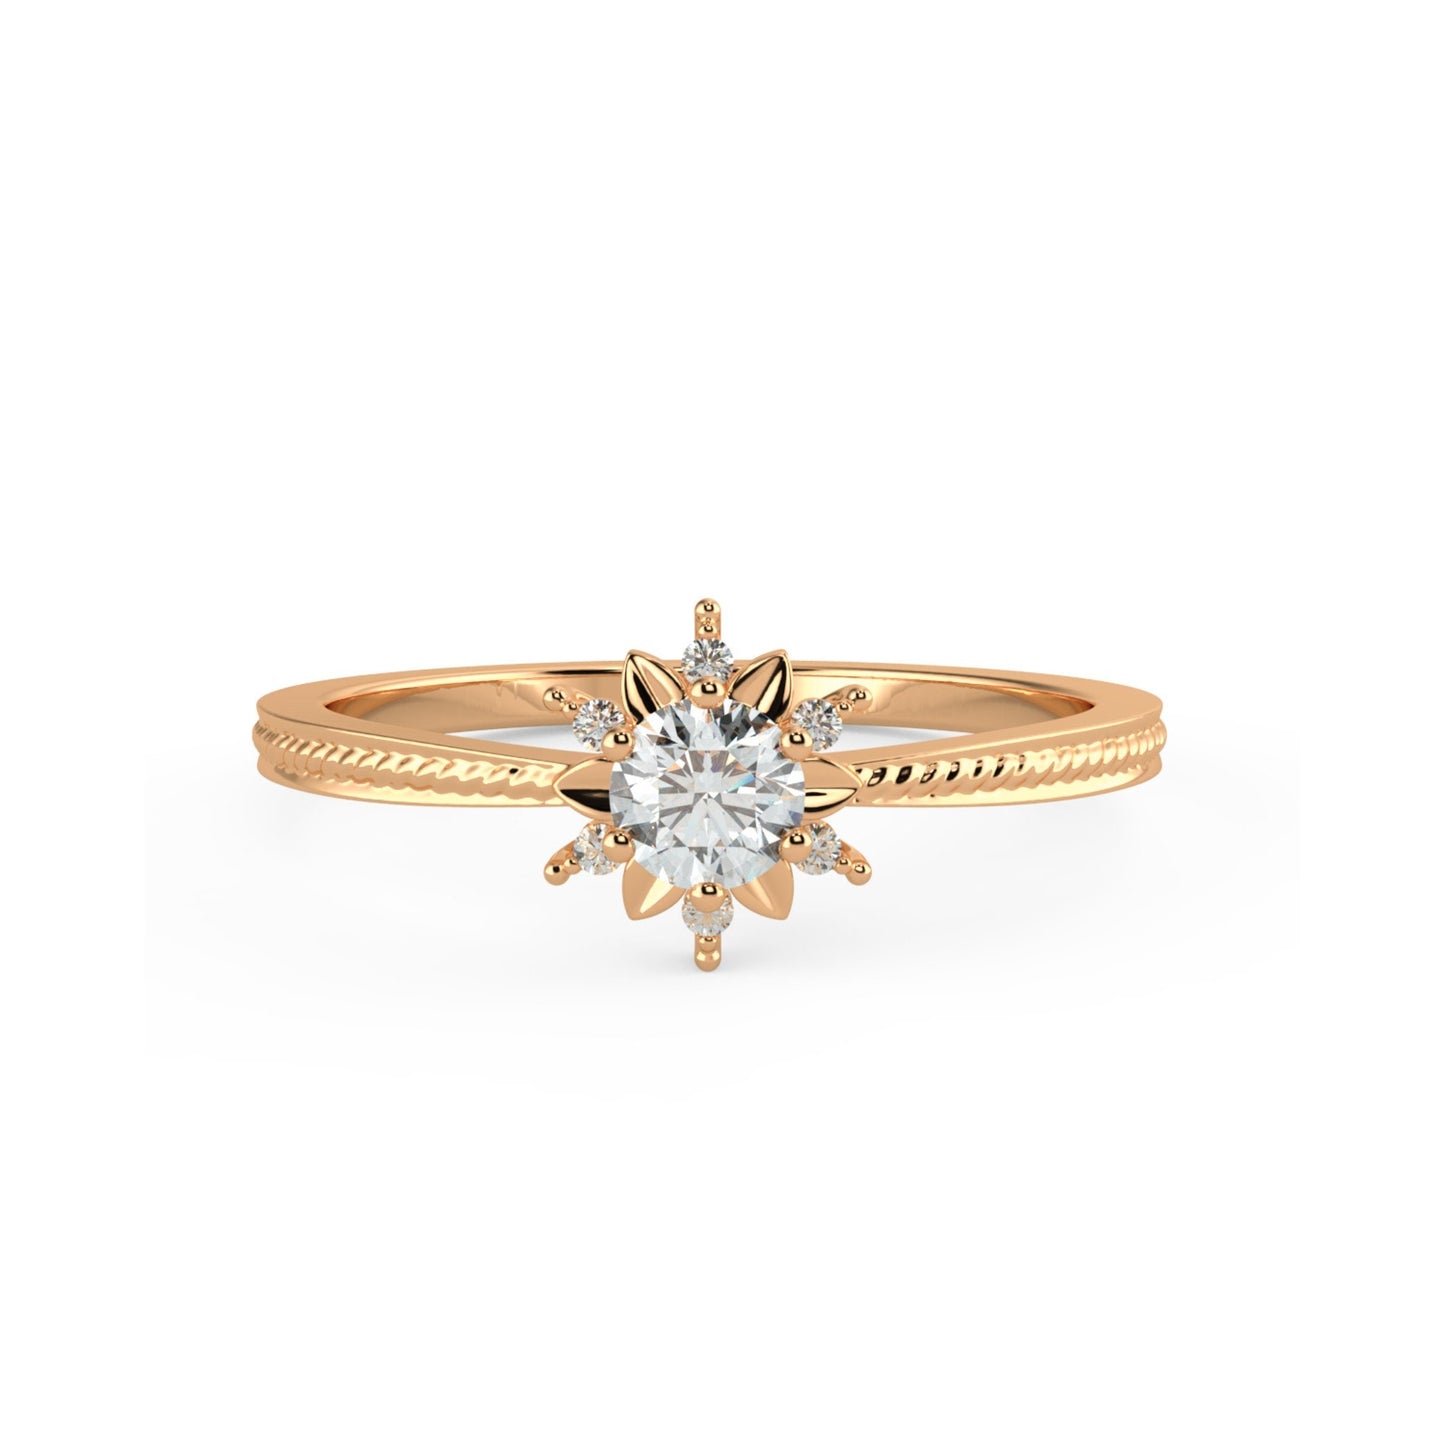 Engagement Ring, Diamond Ring, 14k Solid Gold Engagement Ring, Floral Diamond Engagement ring, Diamond Engagement Ring for Women